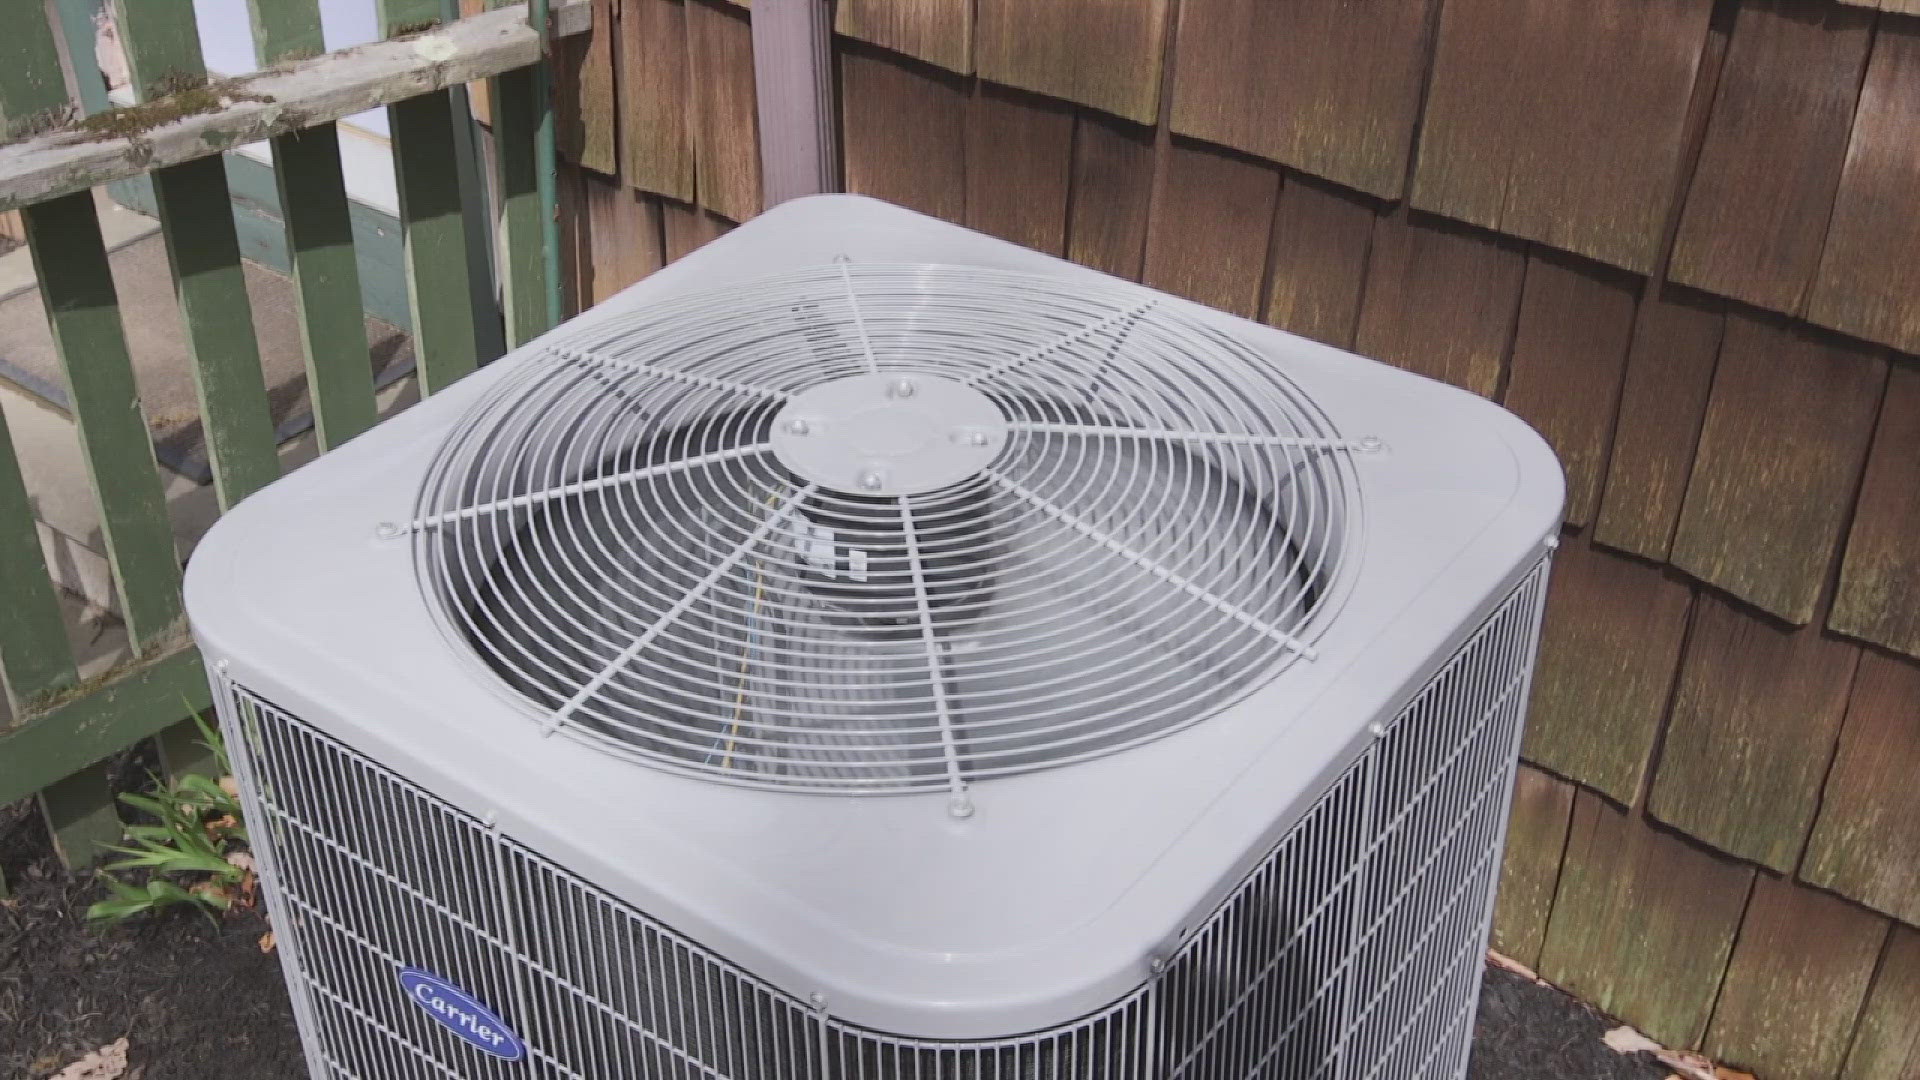 Your pipes, roof and air conditioner could all be affected by the hot temps.